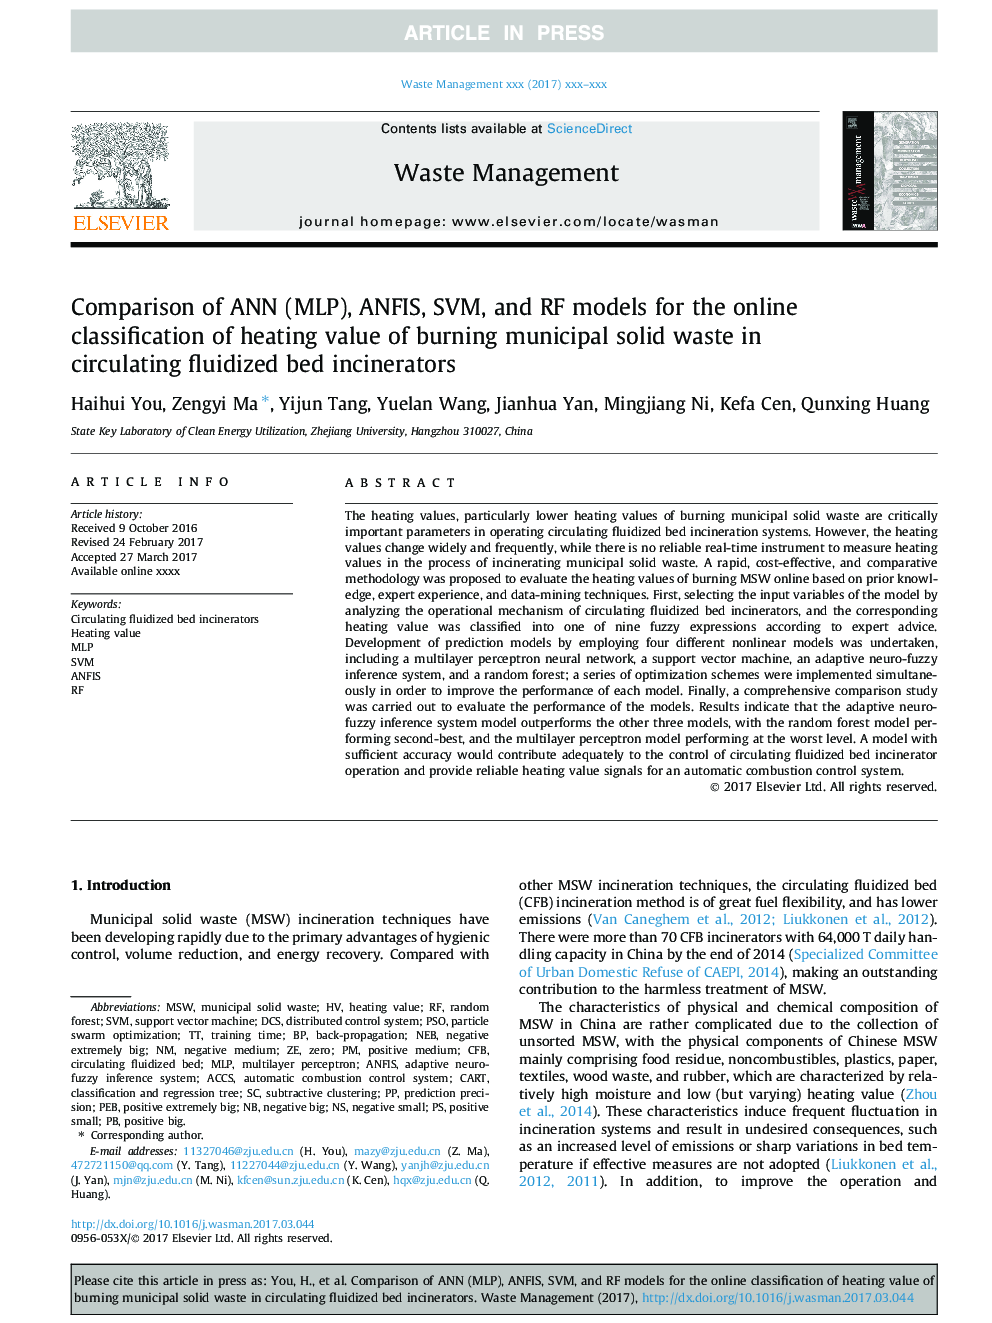 Comparison of ANN (MLP), ANFIS, SVM, and RF models for the online classification of heating value of burning municipal solid waste in circulating fluidized bed incinerators